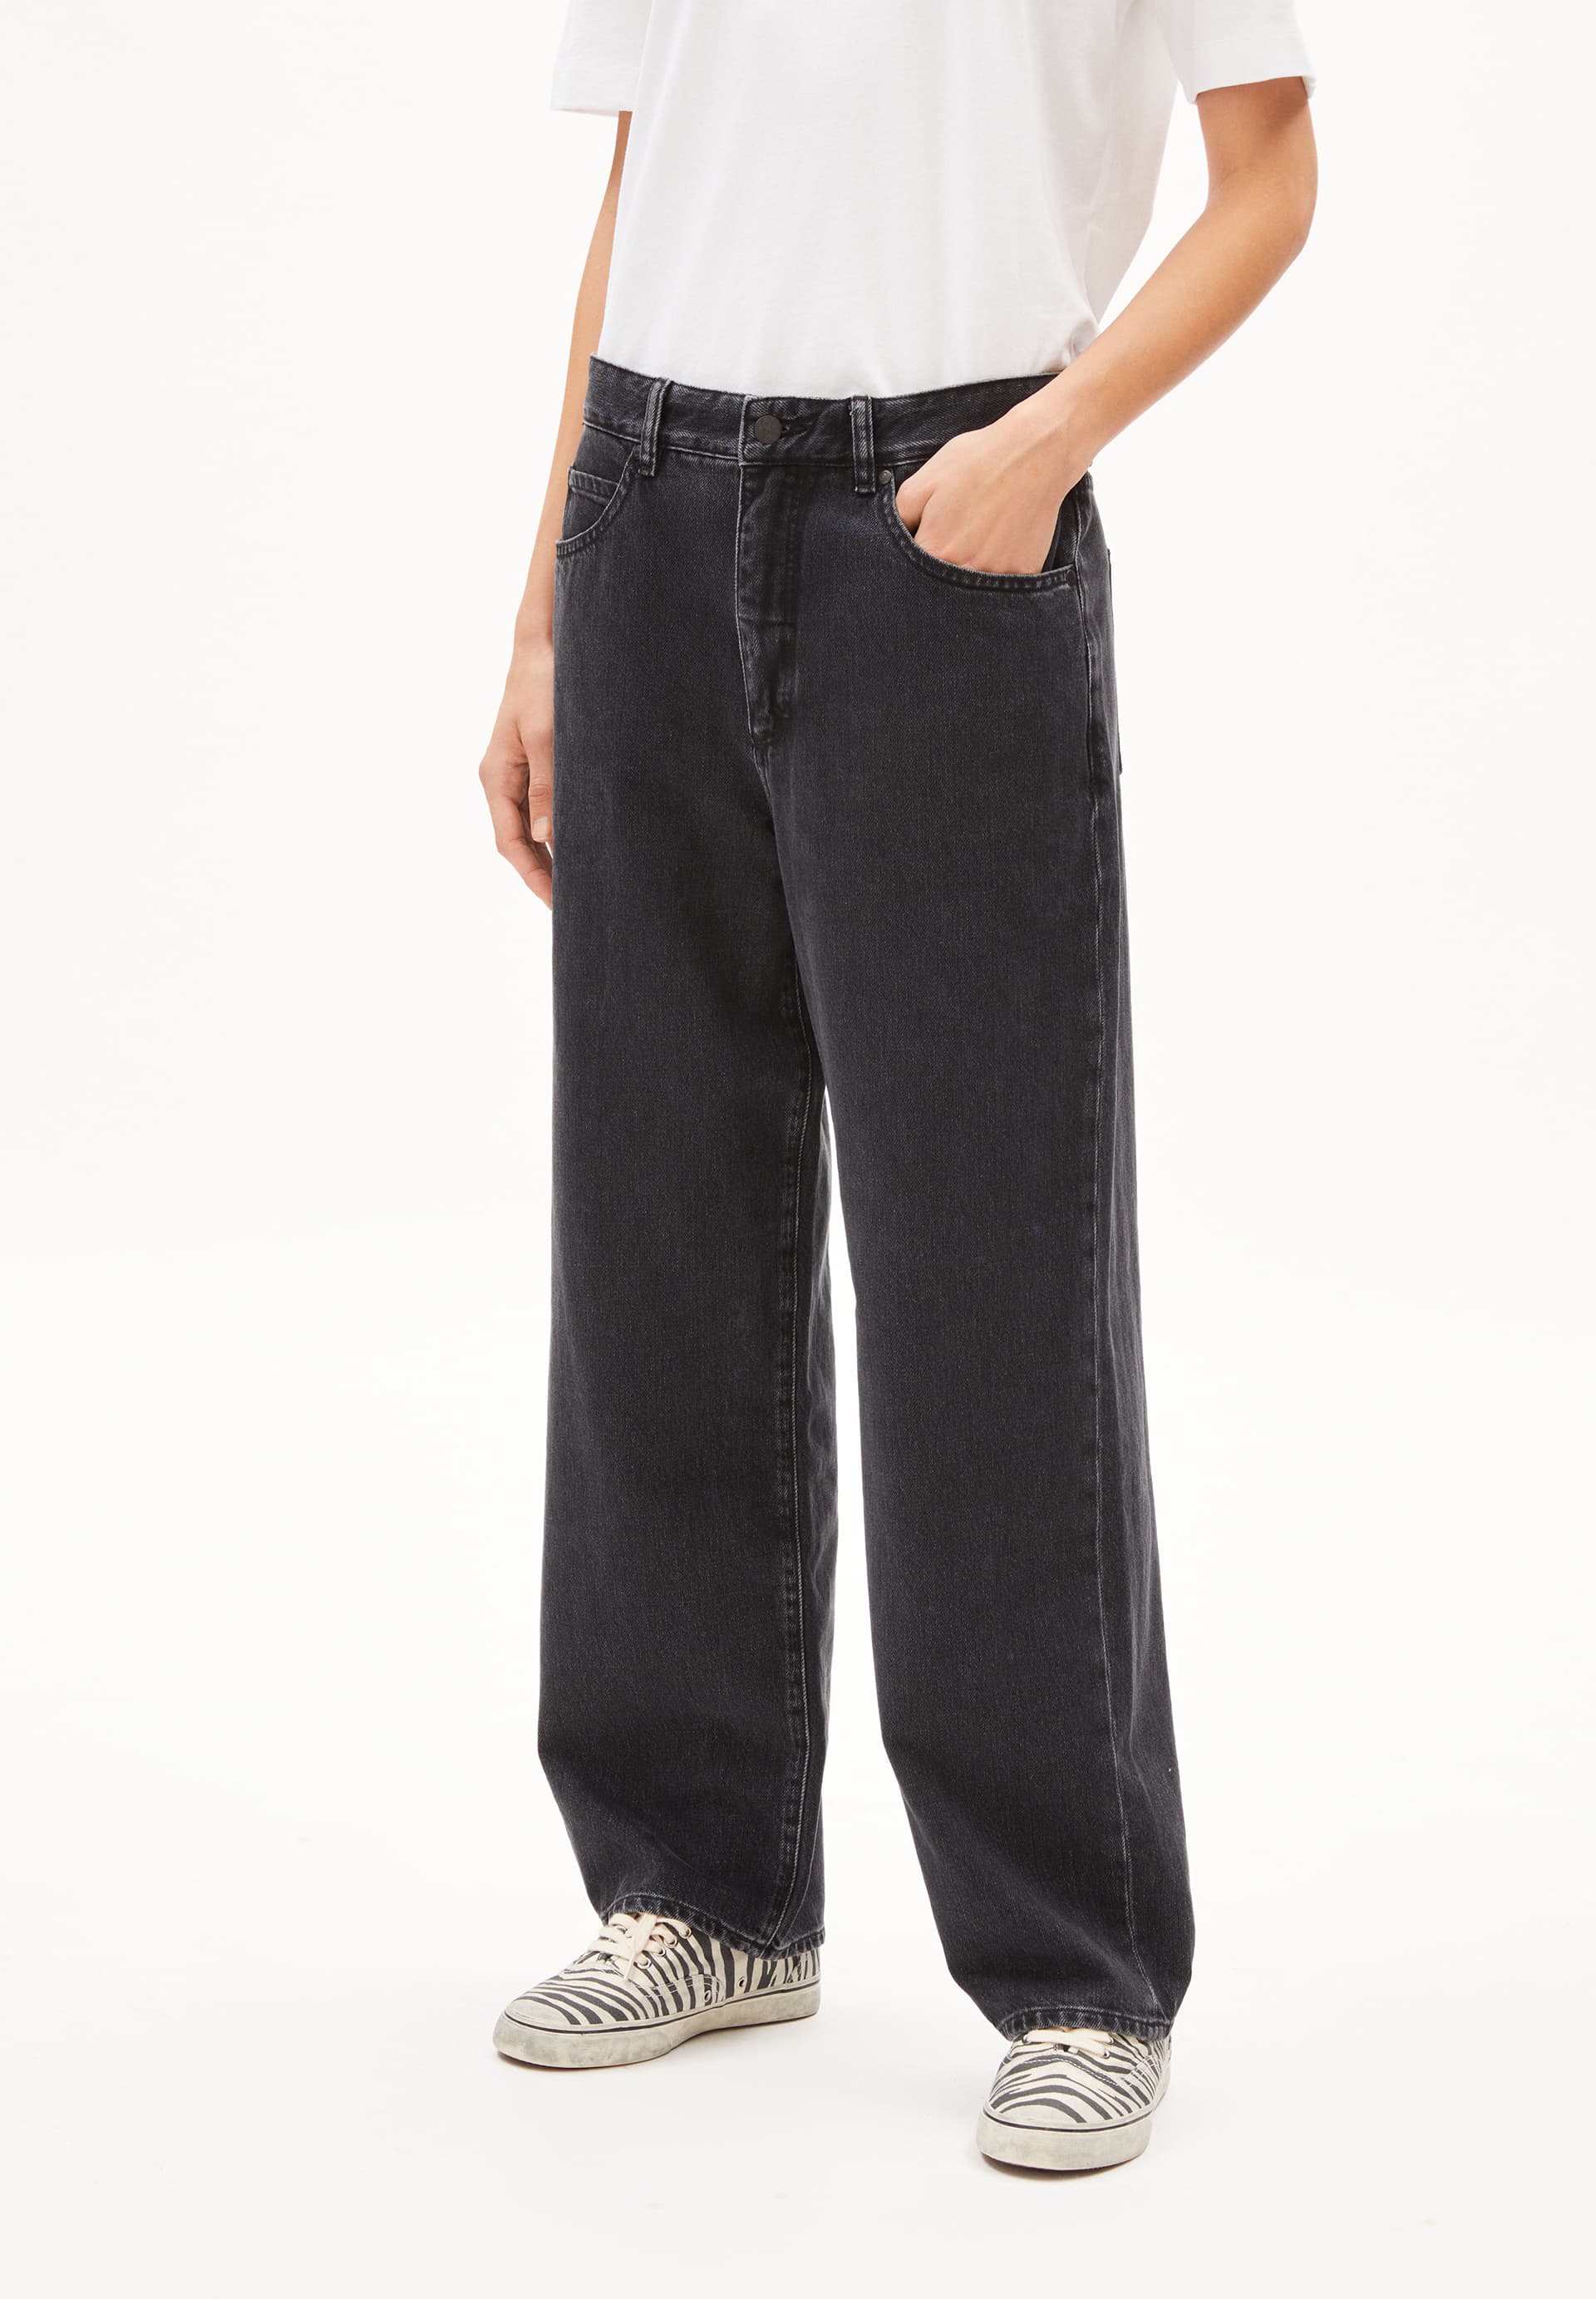 HAAYI Baggy Fit Denim made of Organic Cotton